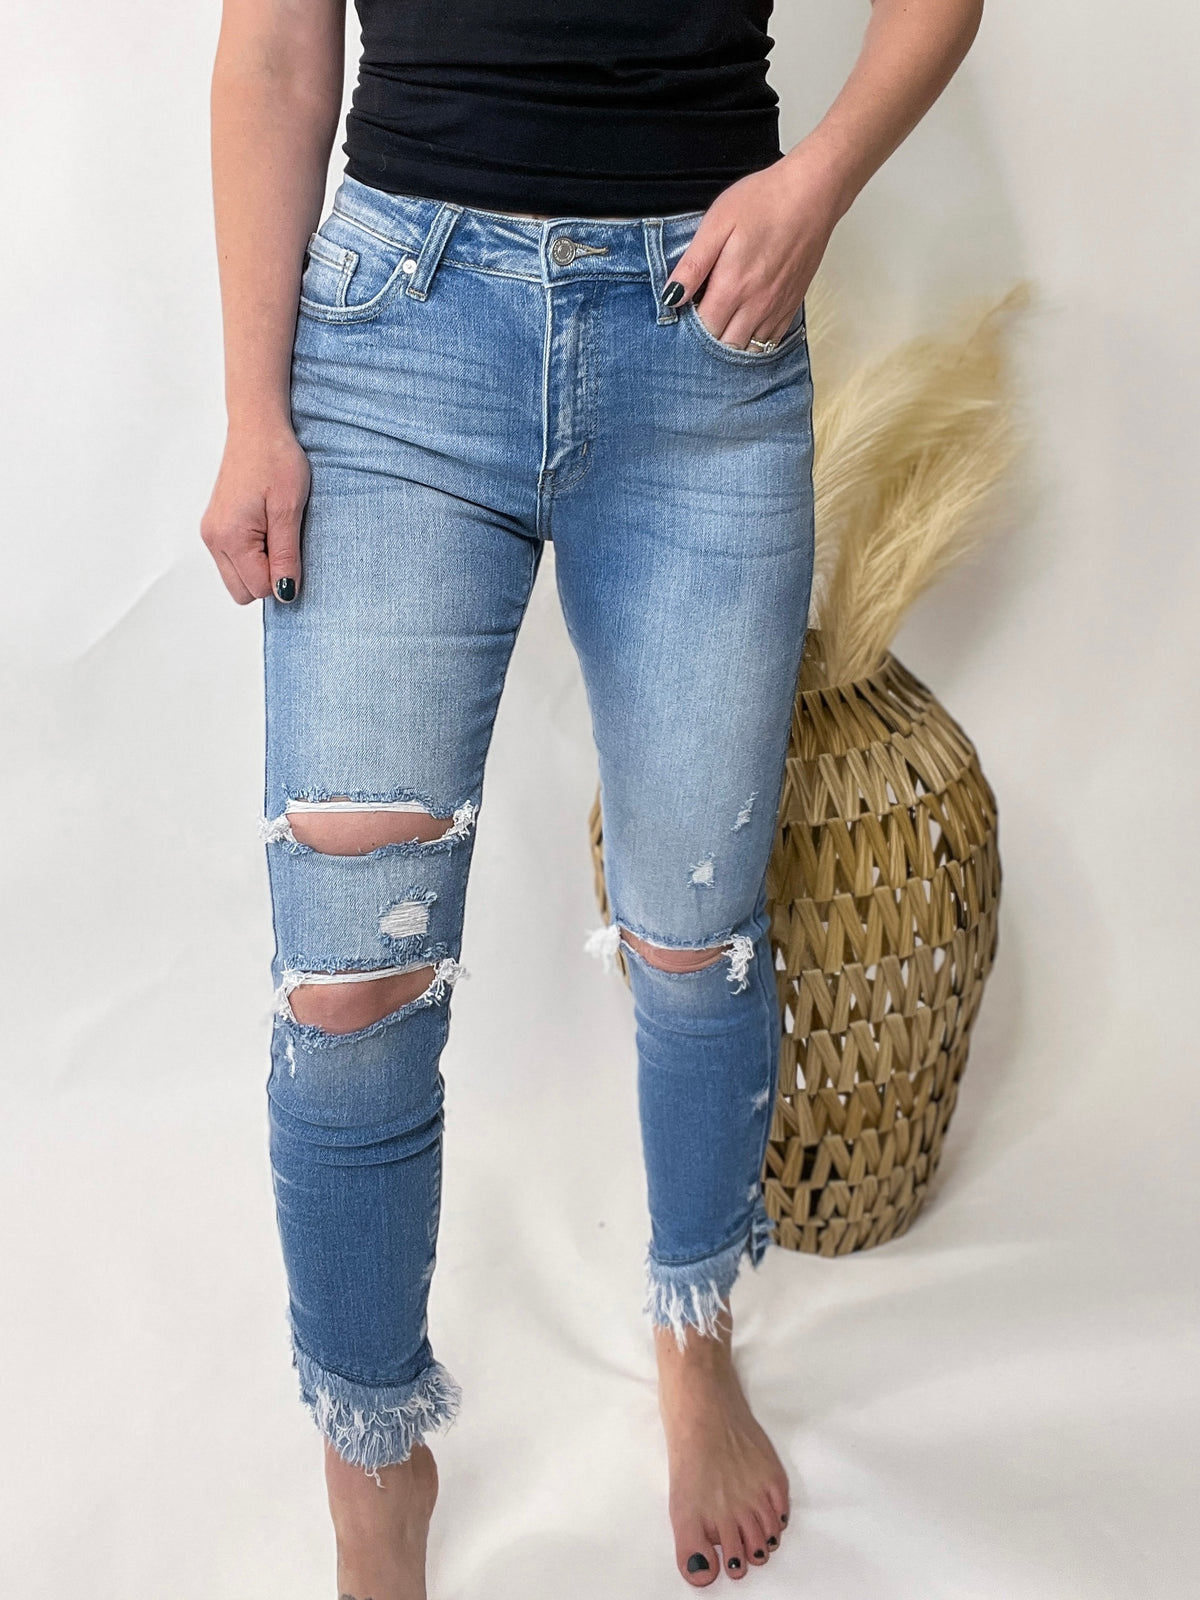 Light Wash KanCan Tiered Frayed Ankle Distressed Skinny Jeans